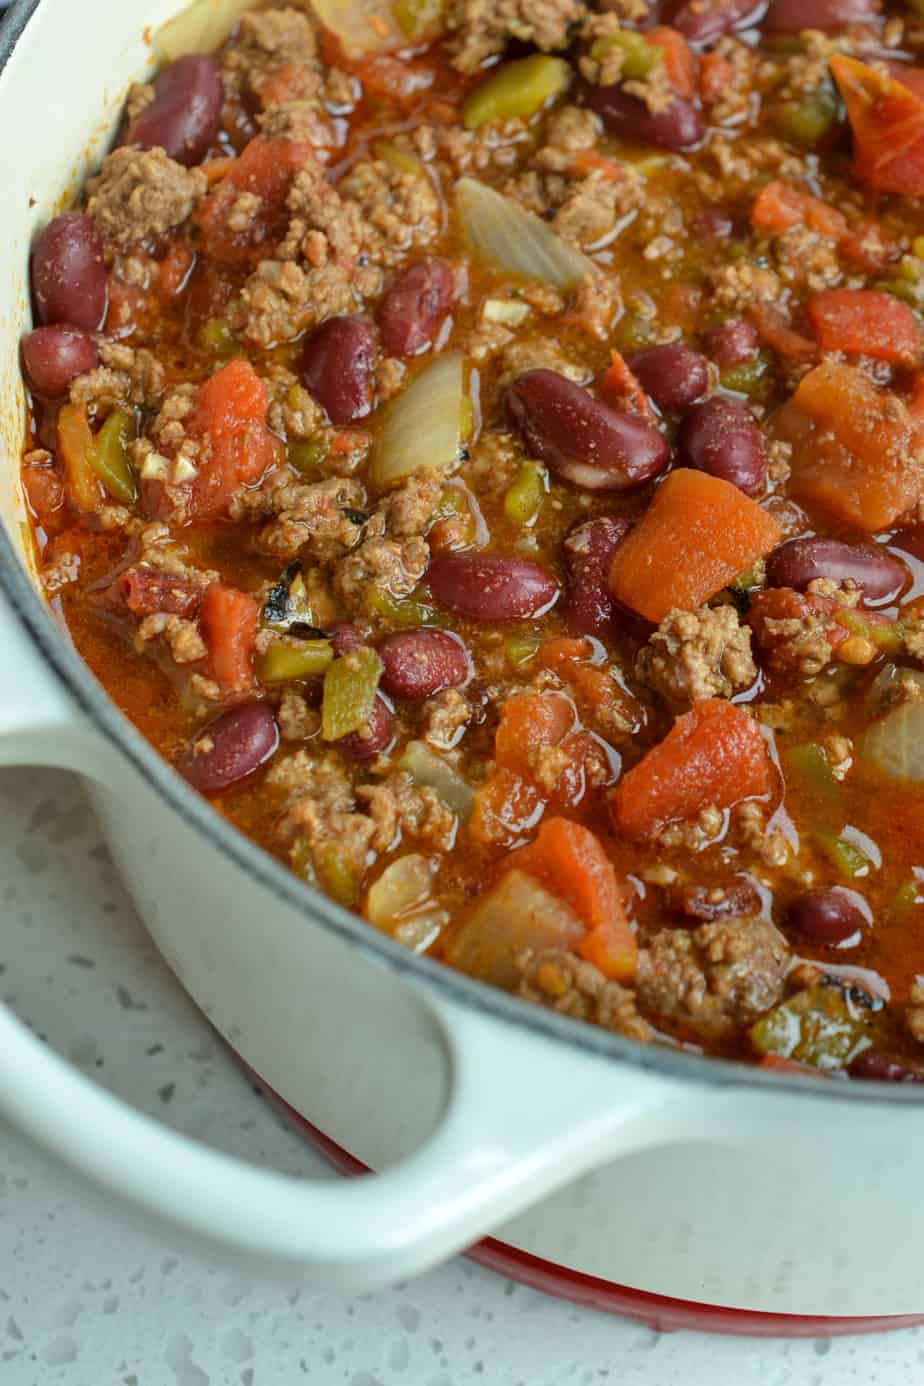 Best Chili Recipe (Thick and Hearty with a Little Heat)